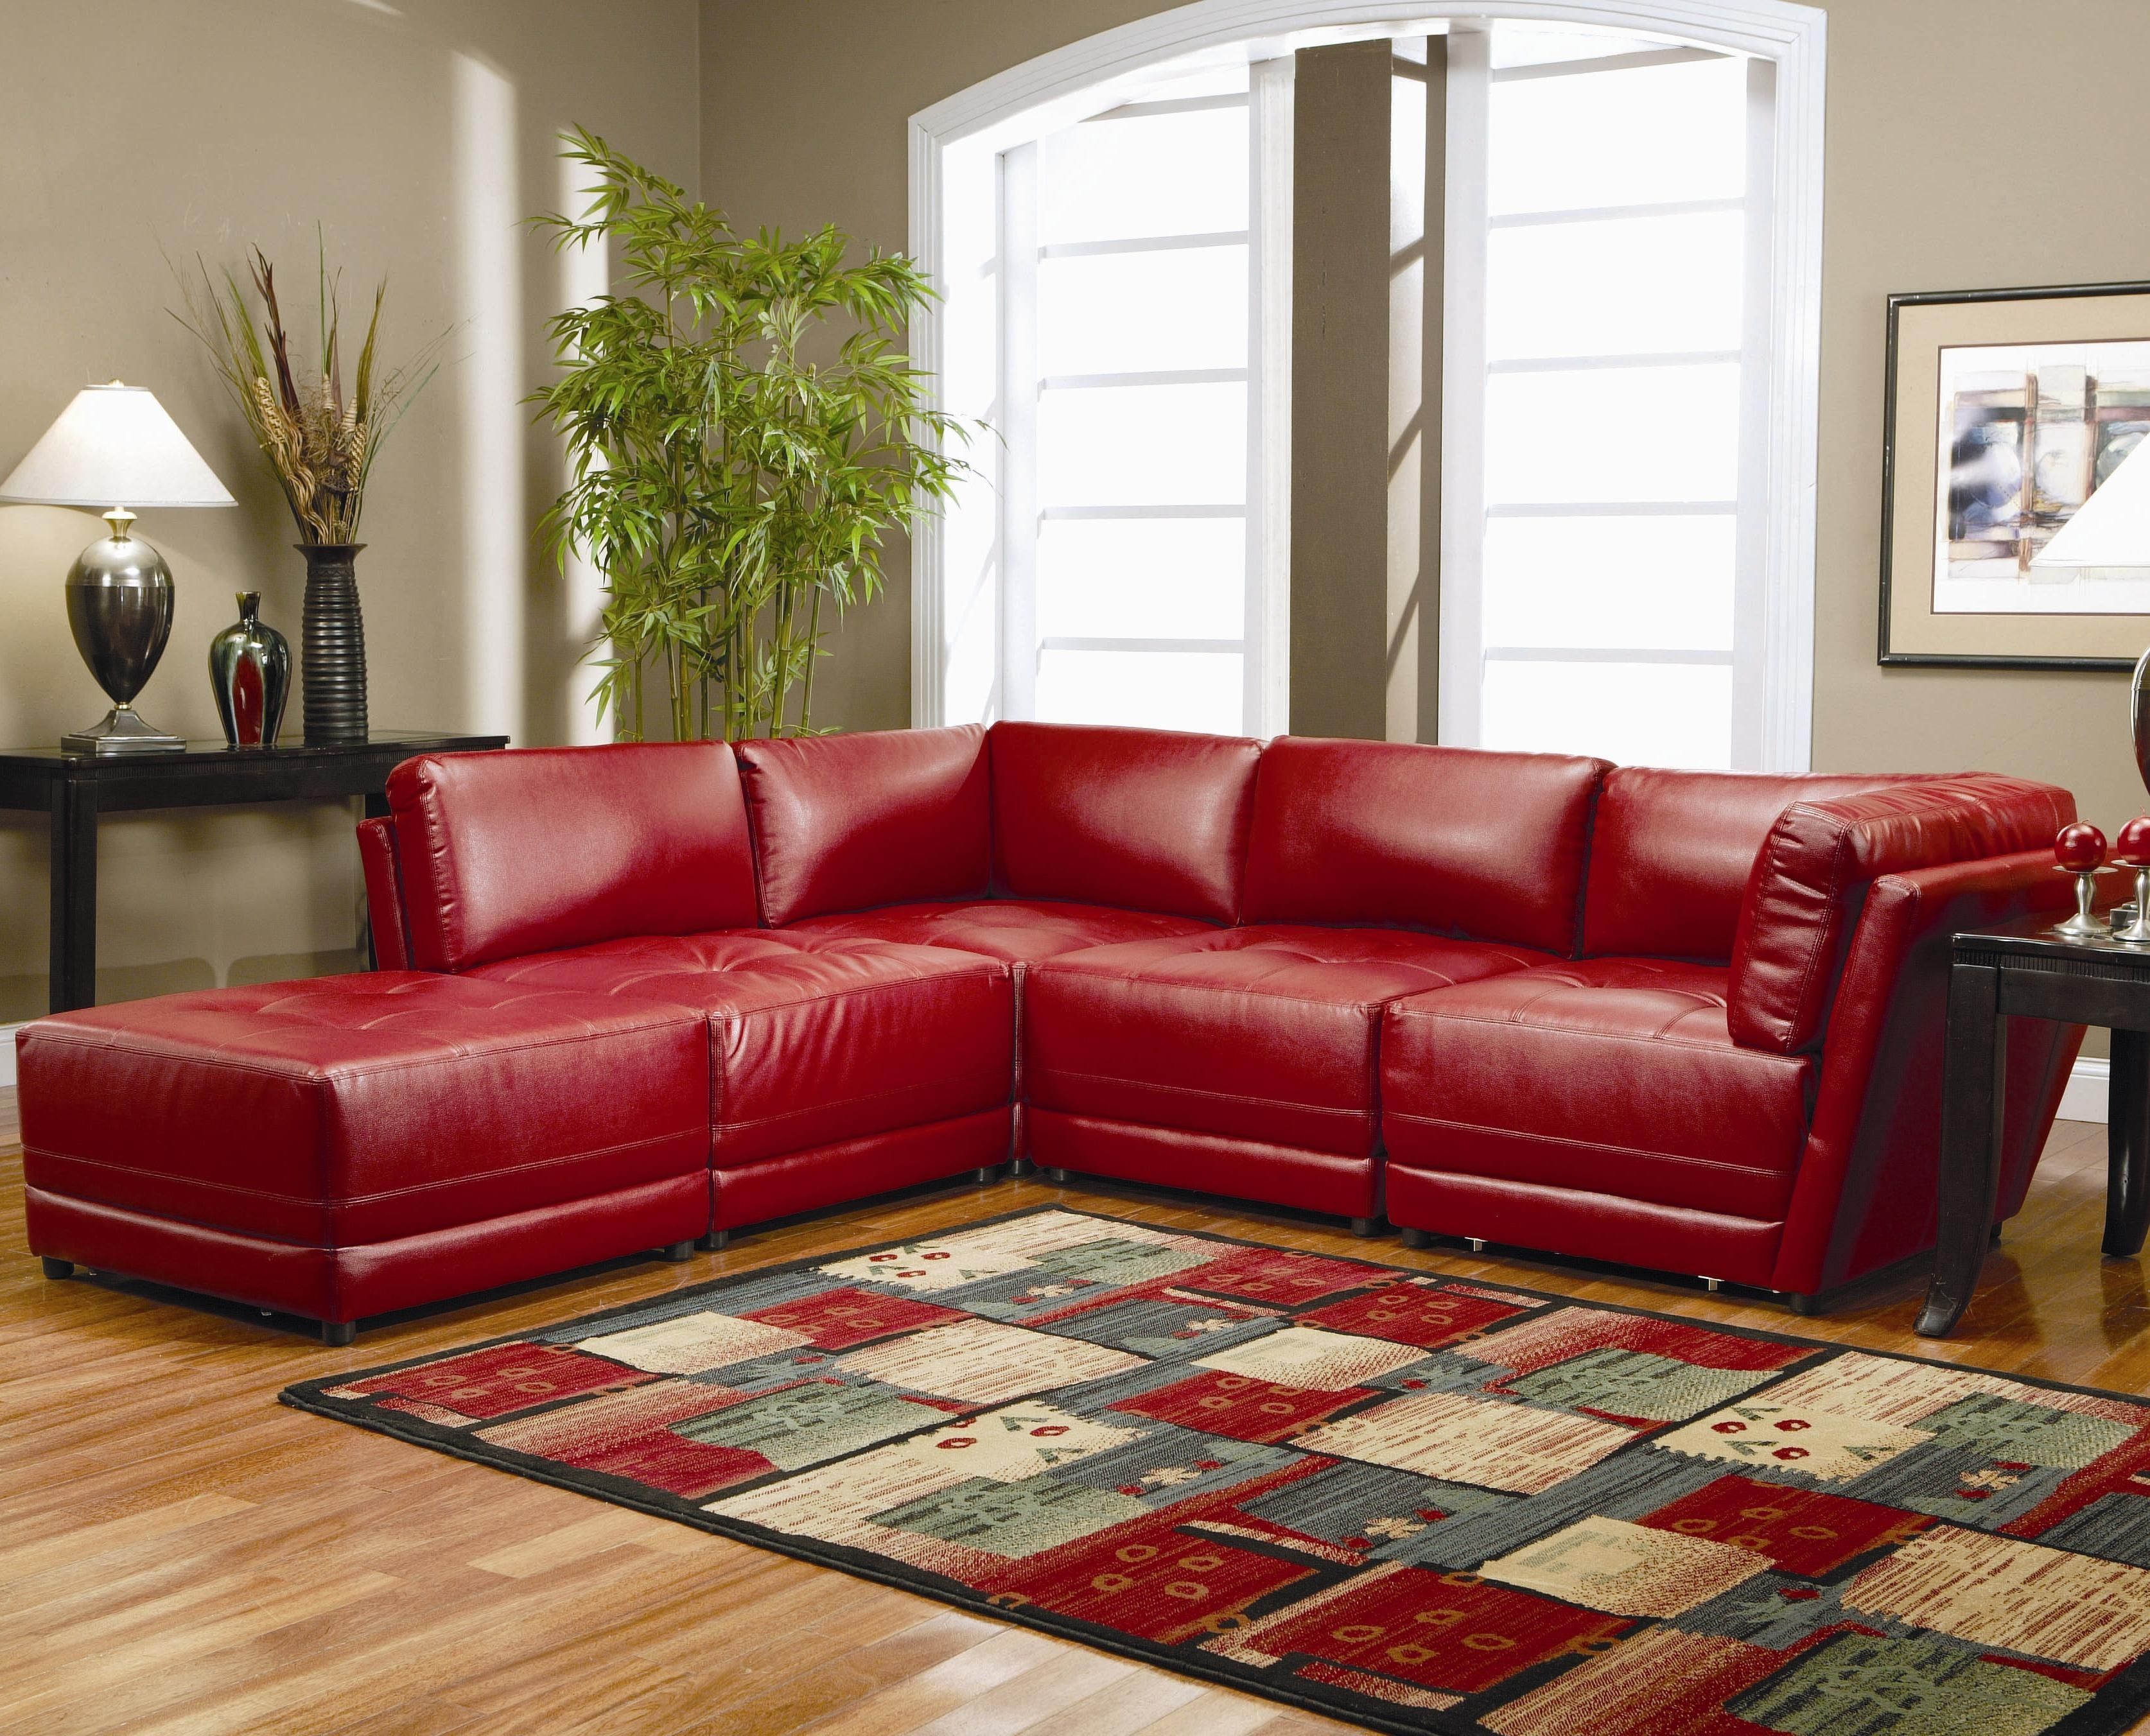 louella cherry red leather sectional sofa